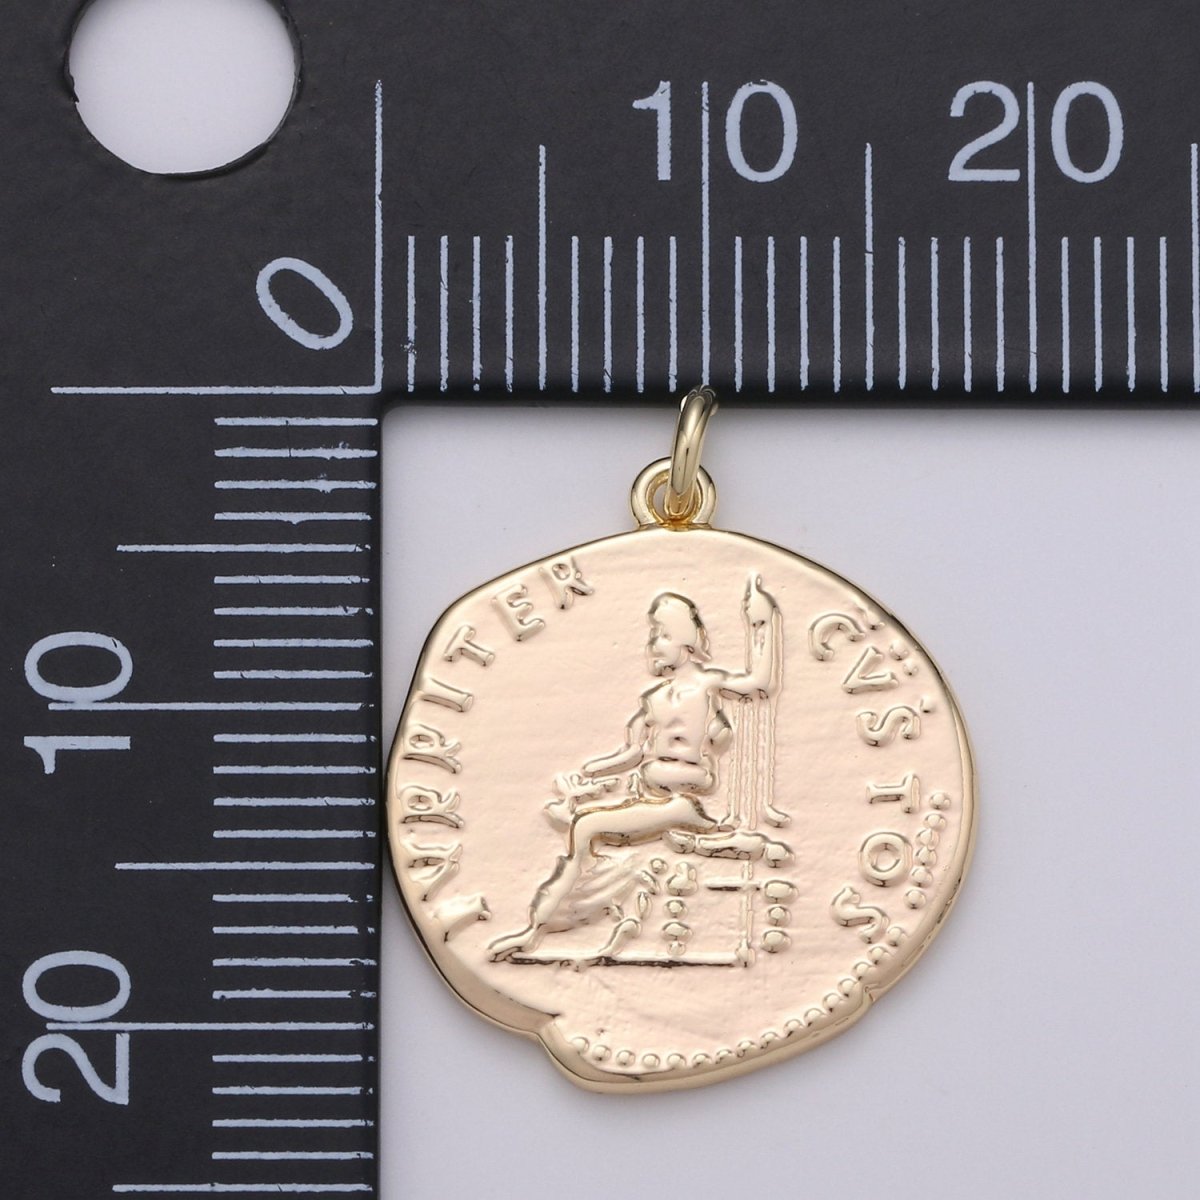 Ancient Greek Coins, 14k Gold Filled coin pendant, Medallion charms, Jupiter Pendant, Zeus coin charms, Greek Jewelry Necklace D-396 - DLUXCA